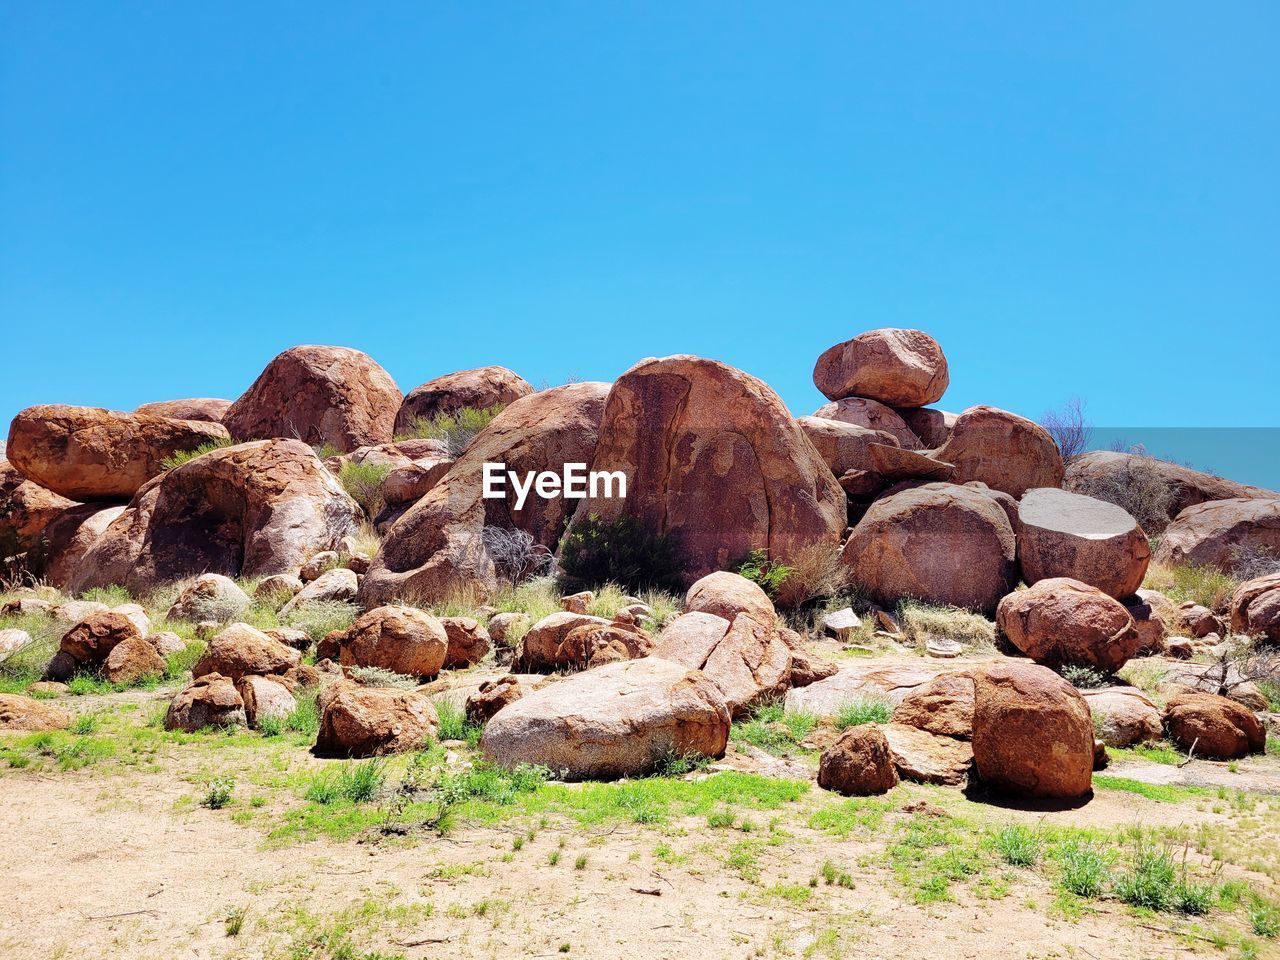 VIEW OF ROCKS ON LAND AGAINST CLEAR BLUE SKY